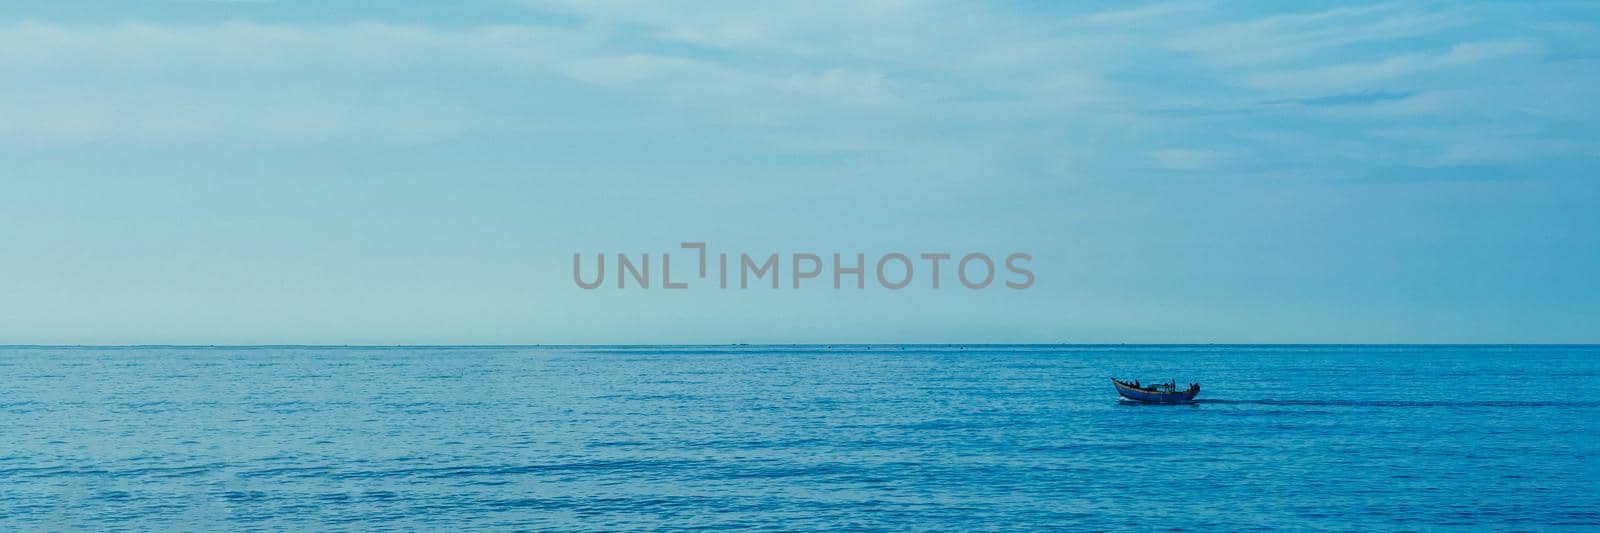 Simple background Calm dark blue sea fishing boat alone white pale Spindrift clouds Open way no limitations. BANNER LONG FORMAT.